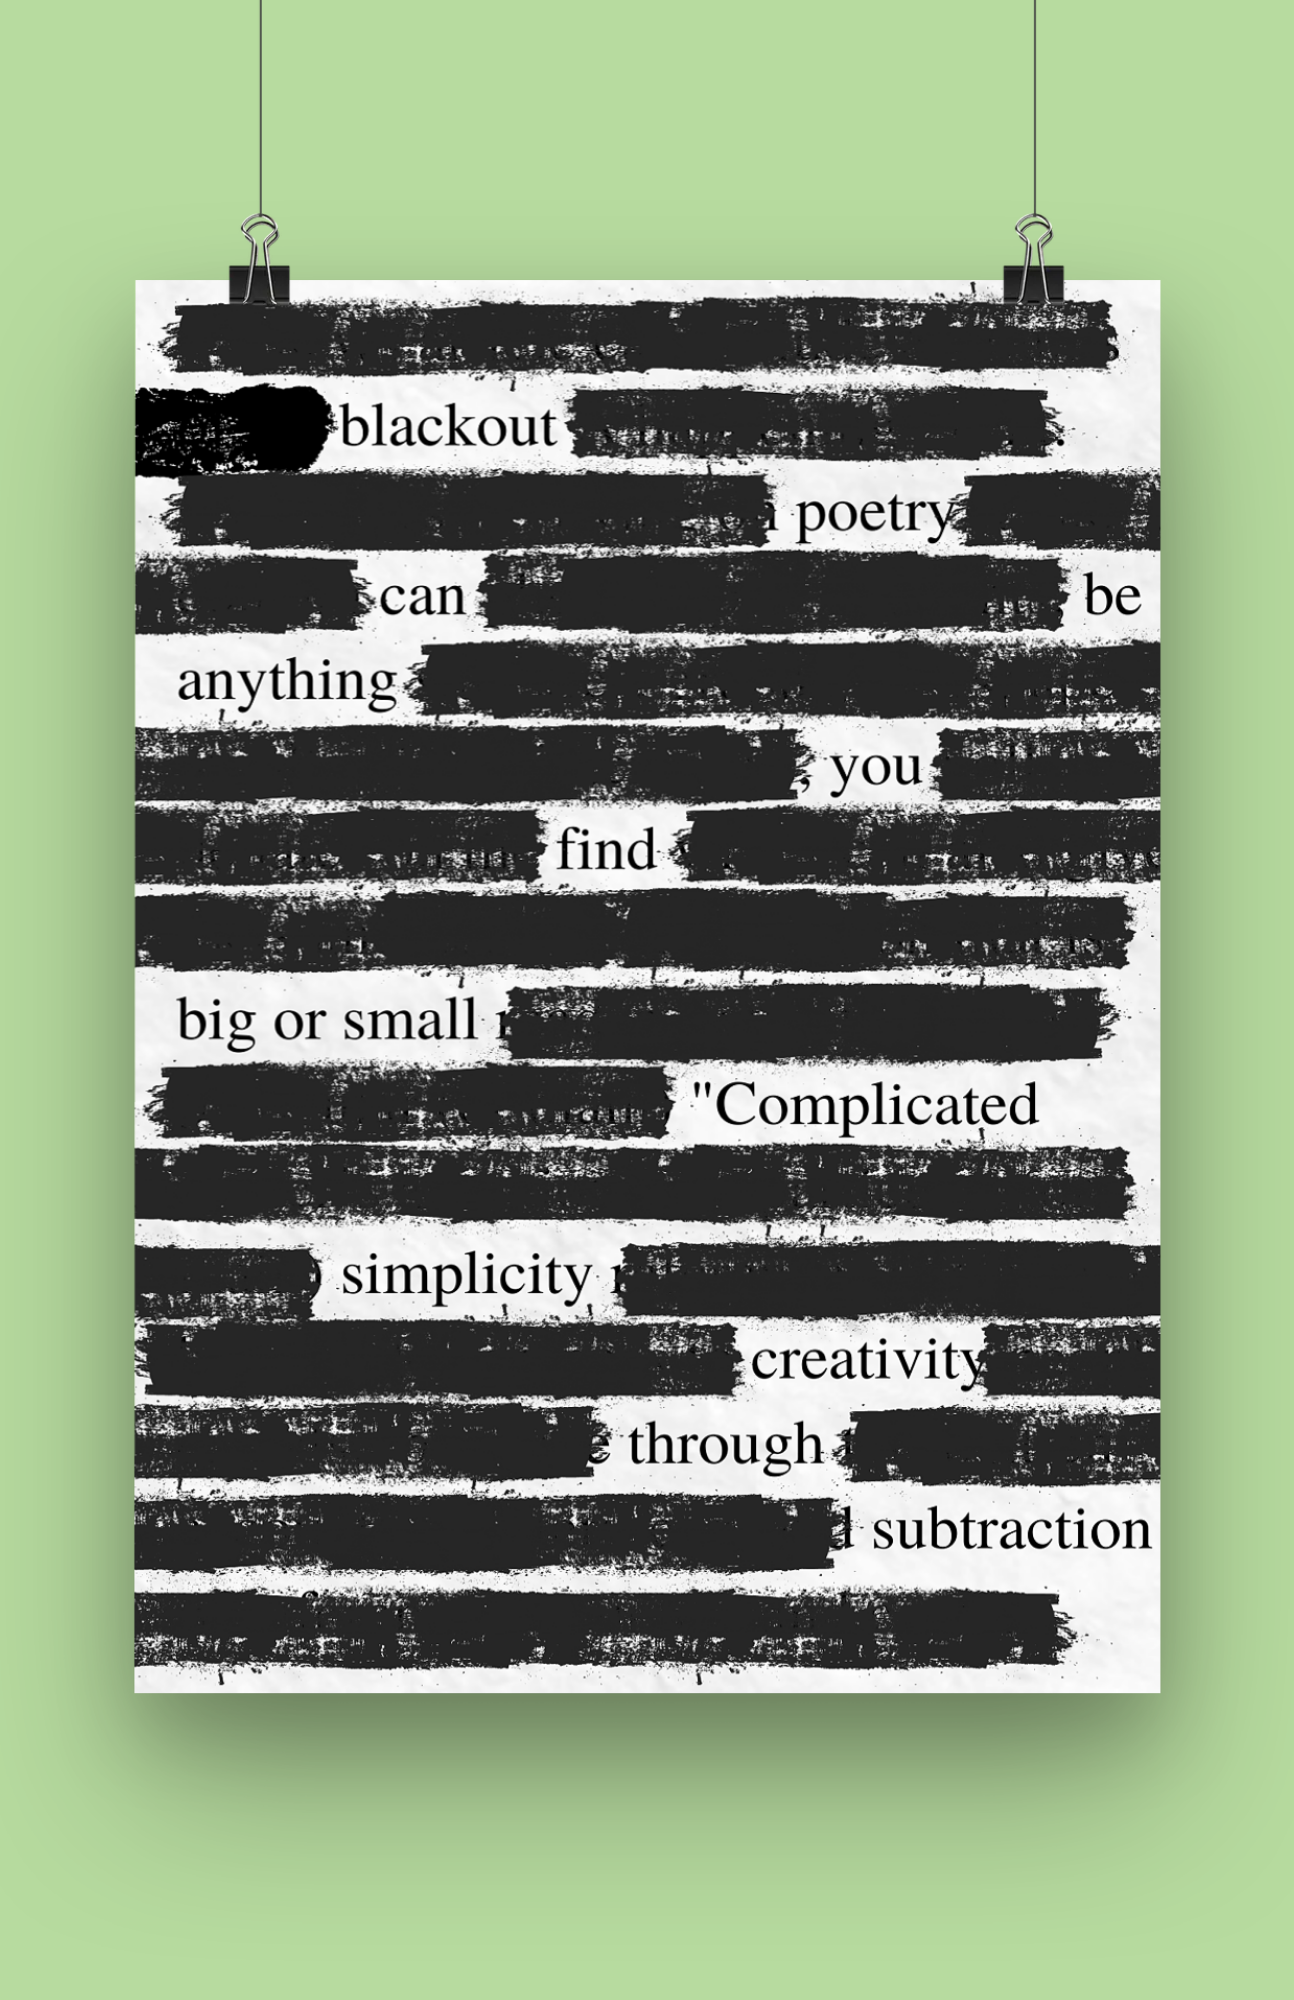 Blackout poetry reading the words "blackout poetry can be anything you find big or small complicated simplicity creativity through subtraction" The words are spaced out on a book page that has had all the other words blacked out, leaving just the earlier quote.